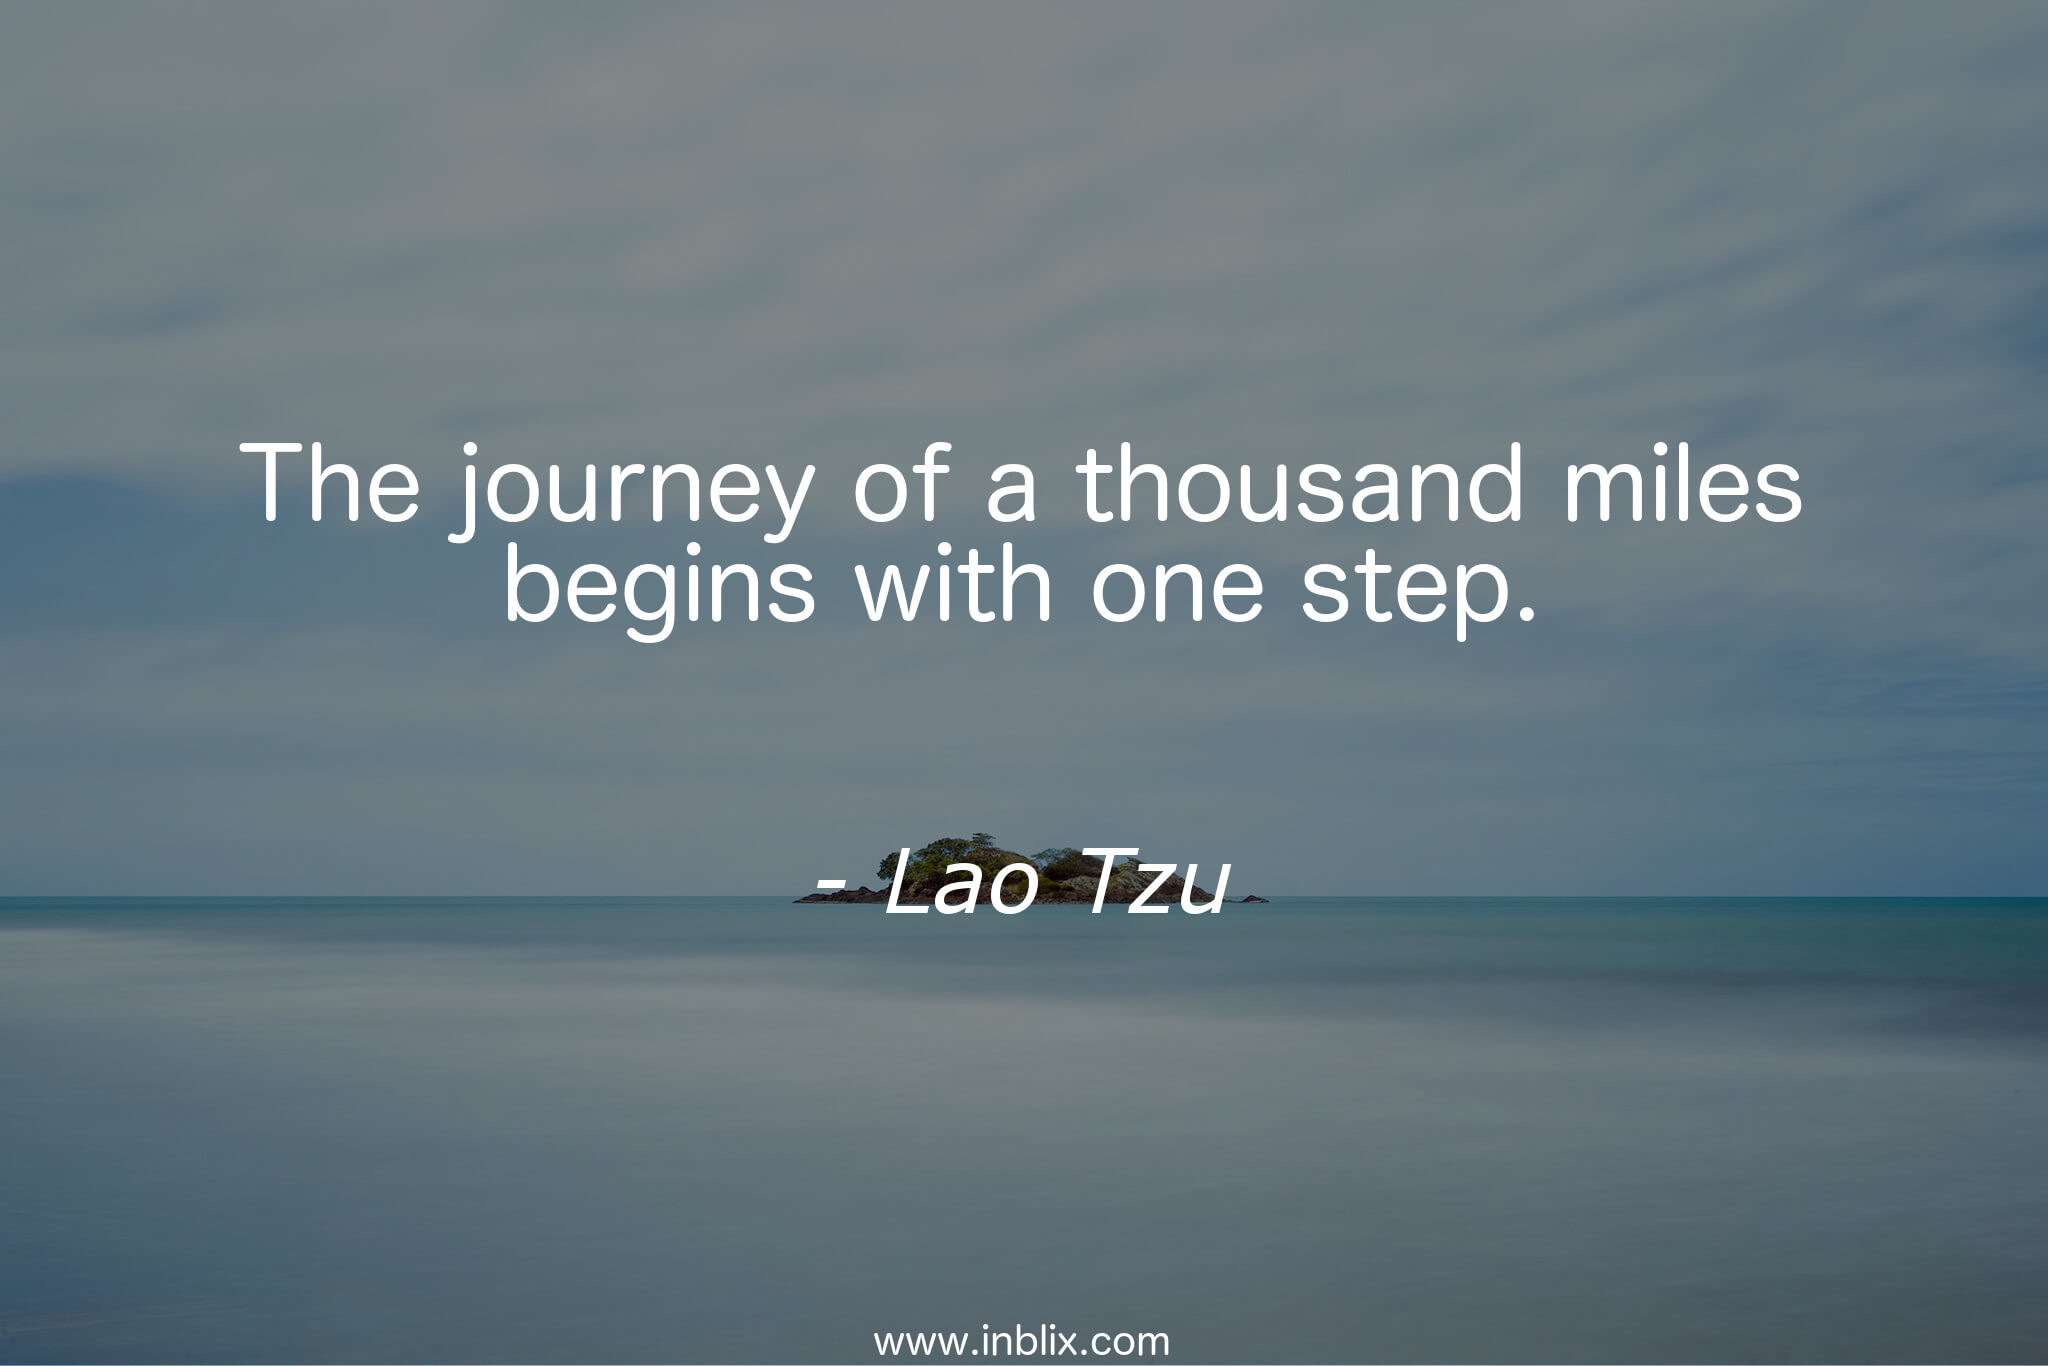 2048x1366 The journey of a thousand miles begins with one step.